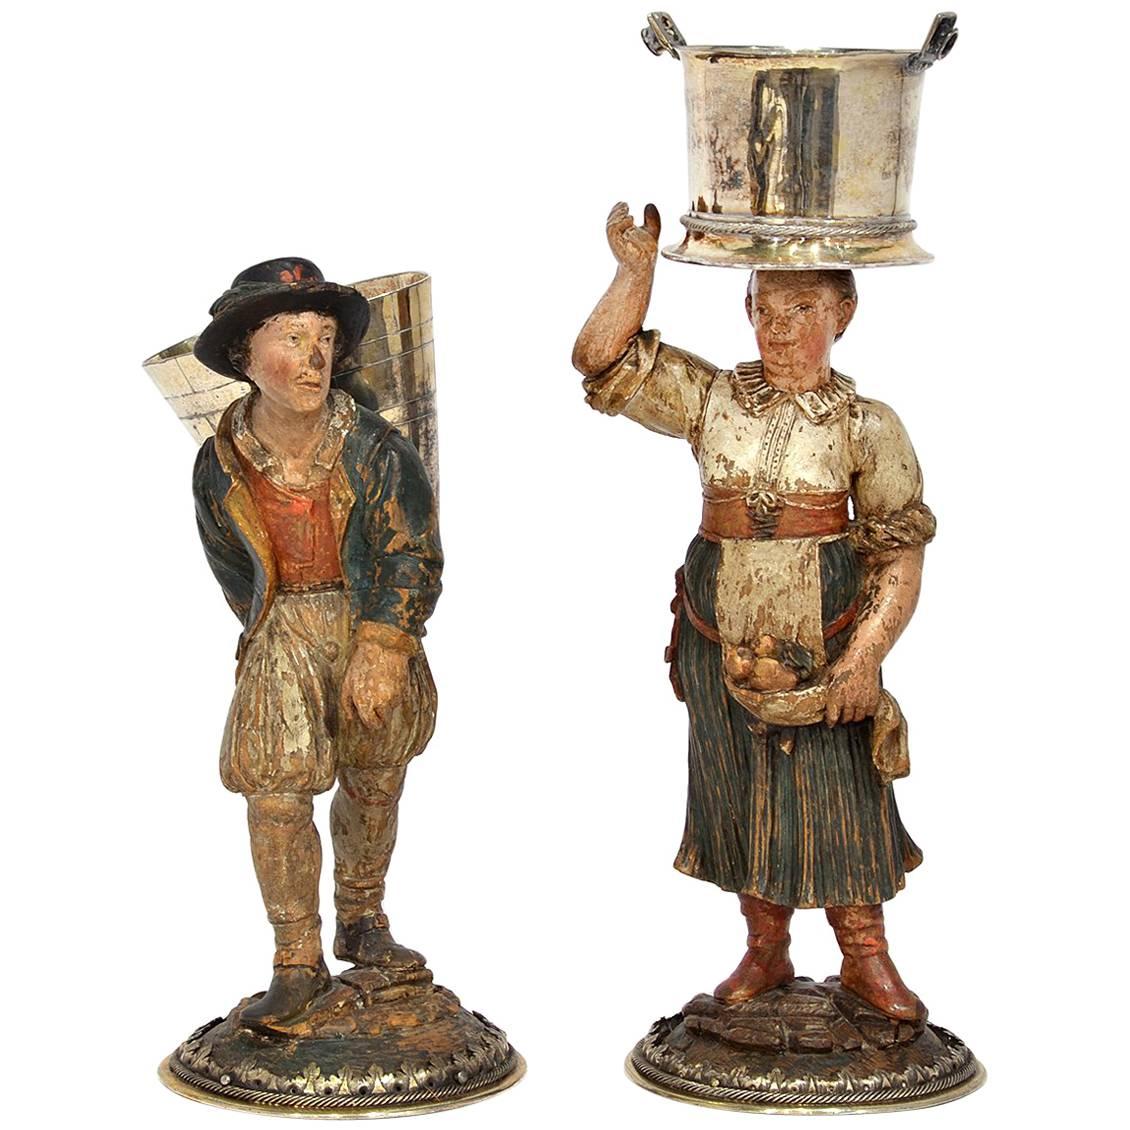 Rare Pair of Late 18th-Early 19th Century Italian Carved and Painted Figures